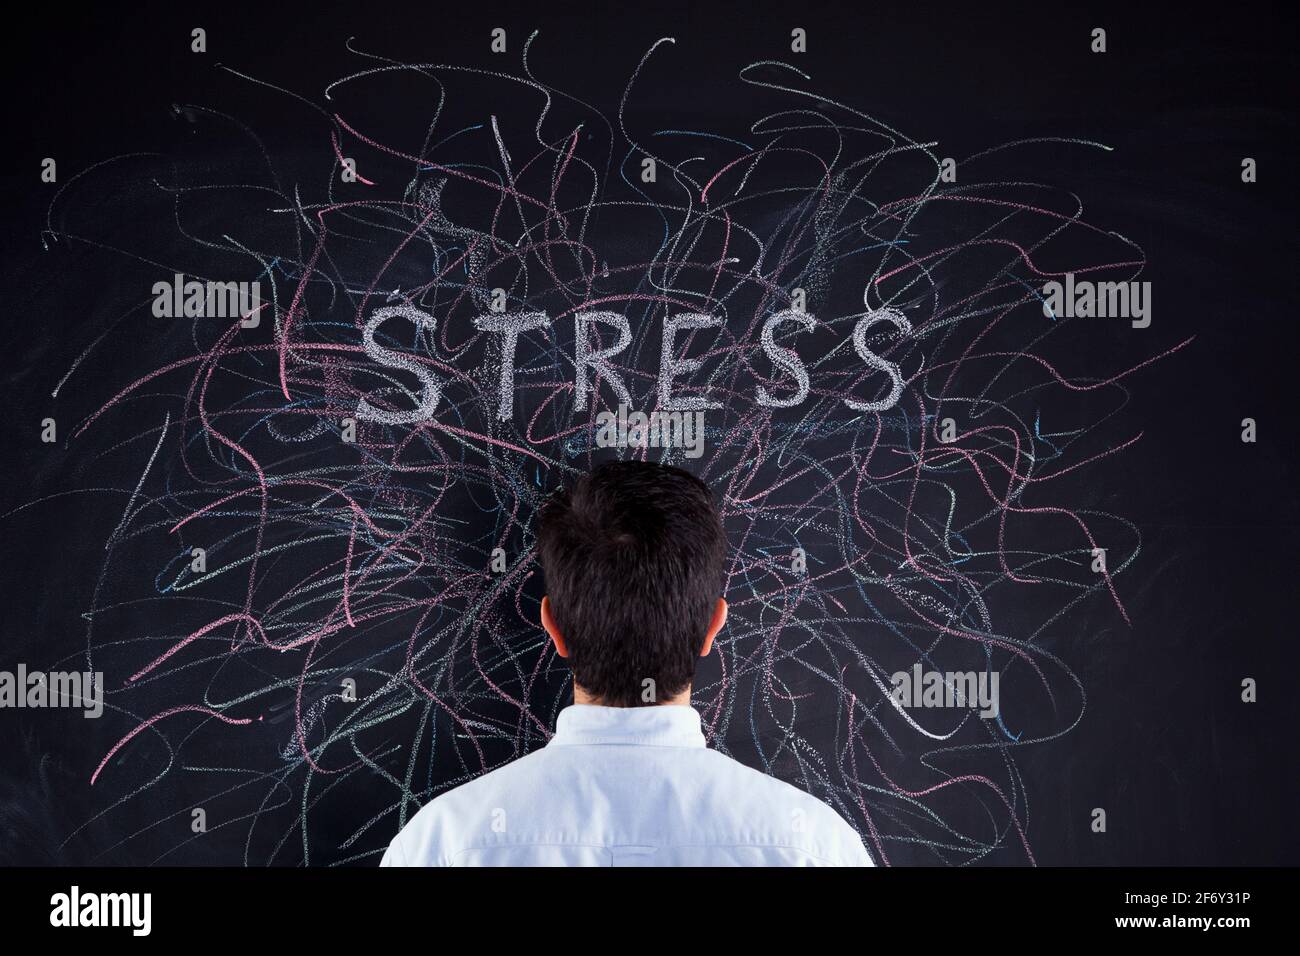 Stressed man looking to a chalkboard with lots of crazy lines Stock Photo